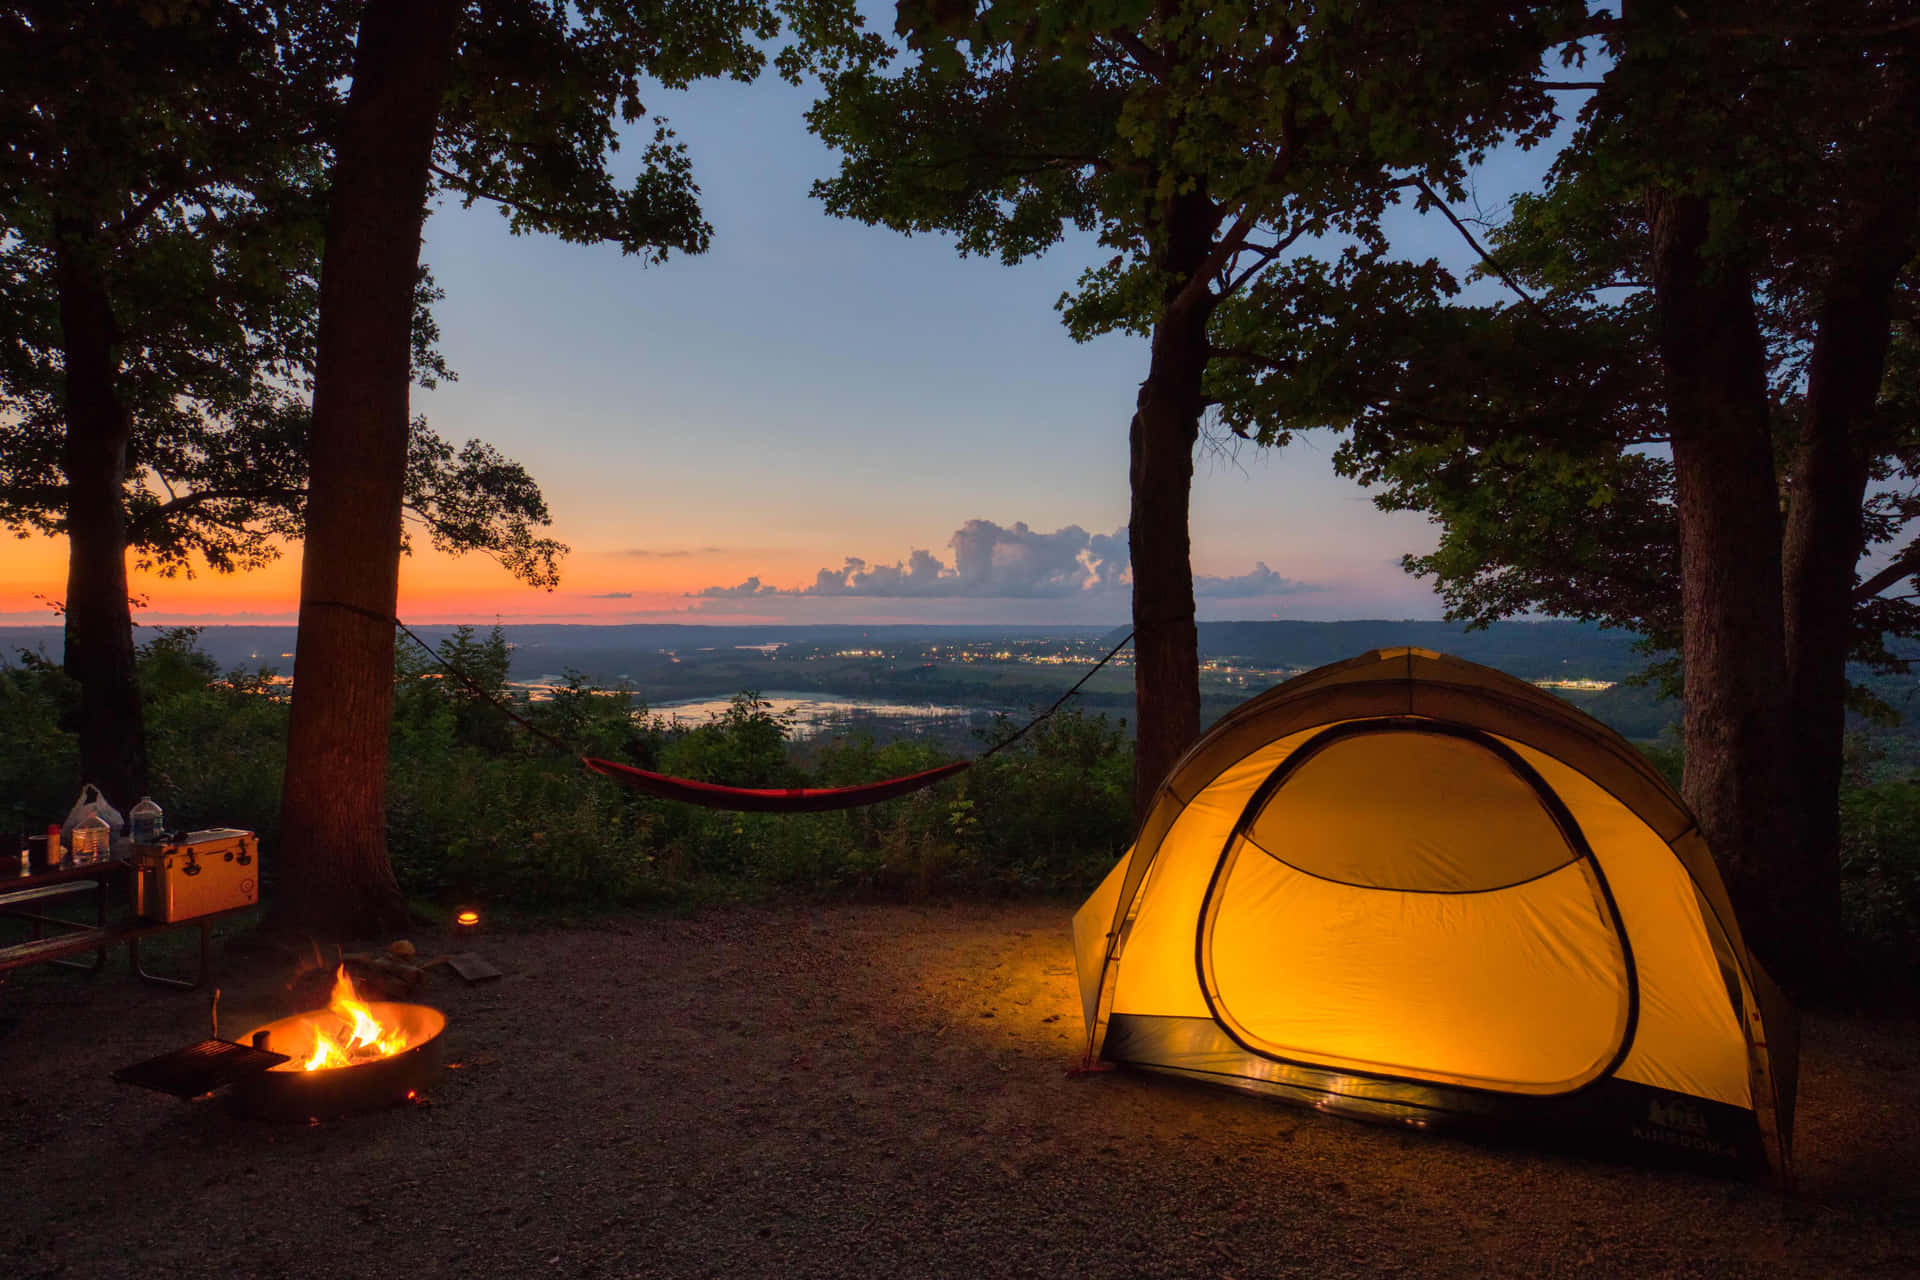 Set Up Camp and Enjoy the Scenery